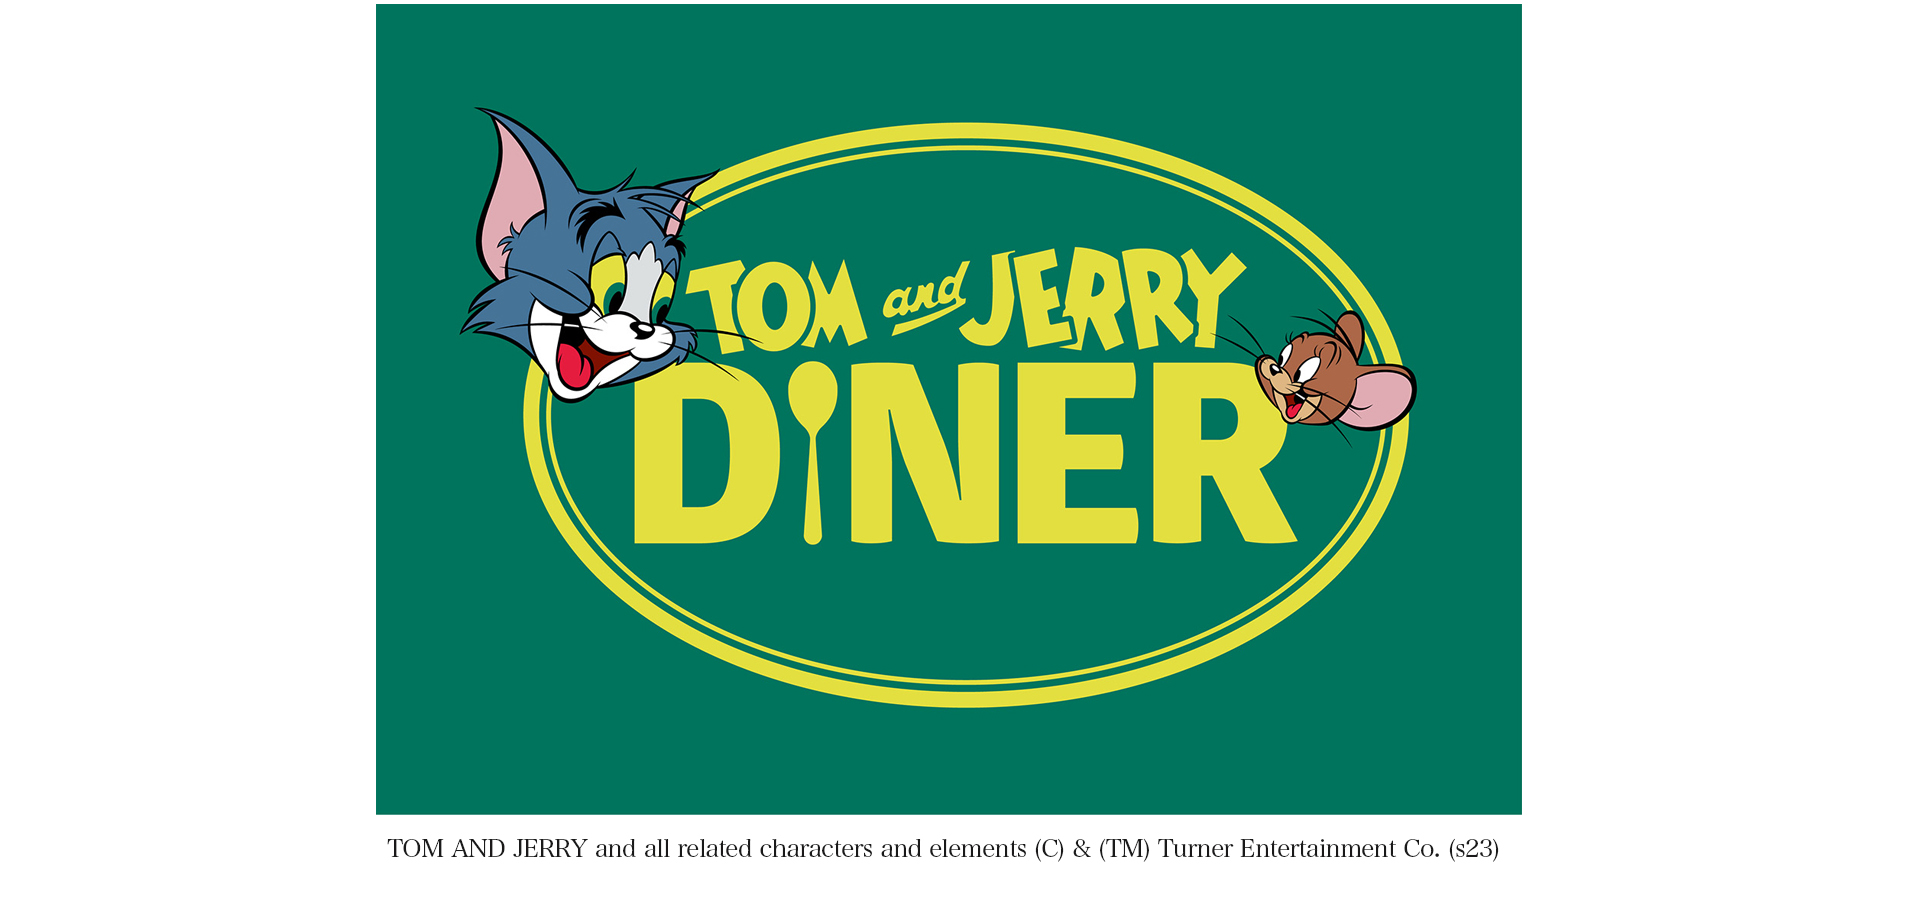 TOM and JERRY DINERポスター